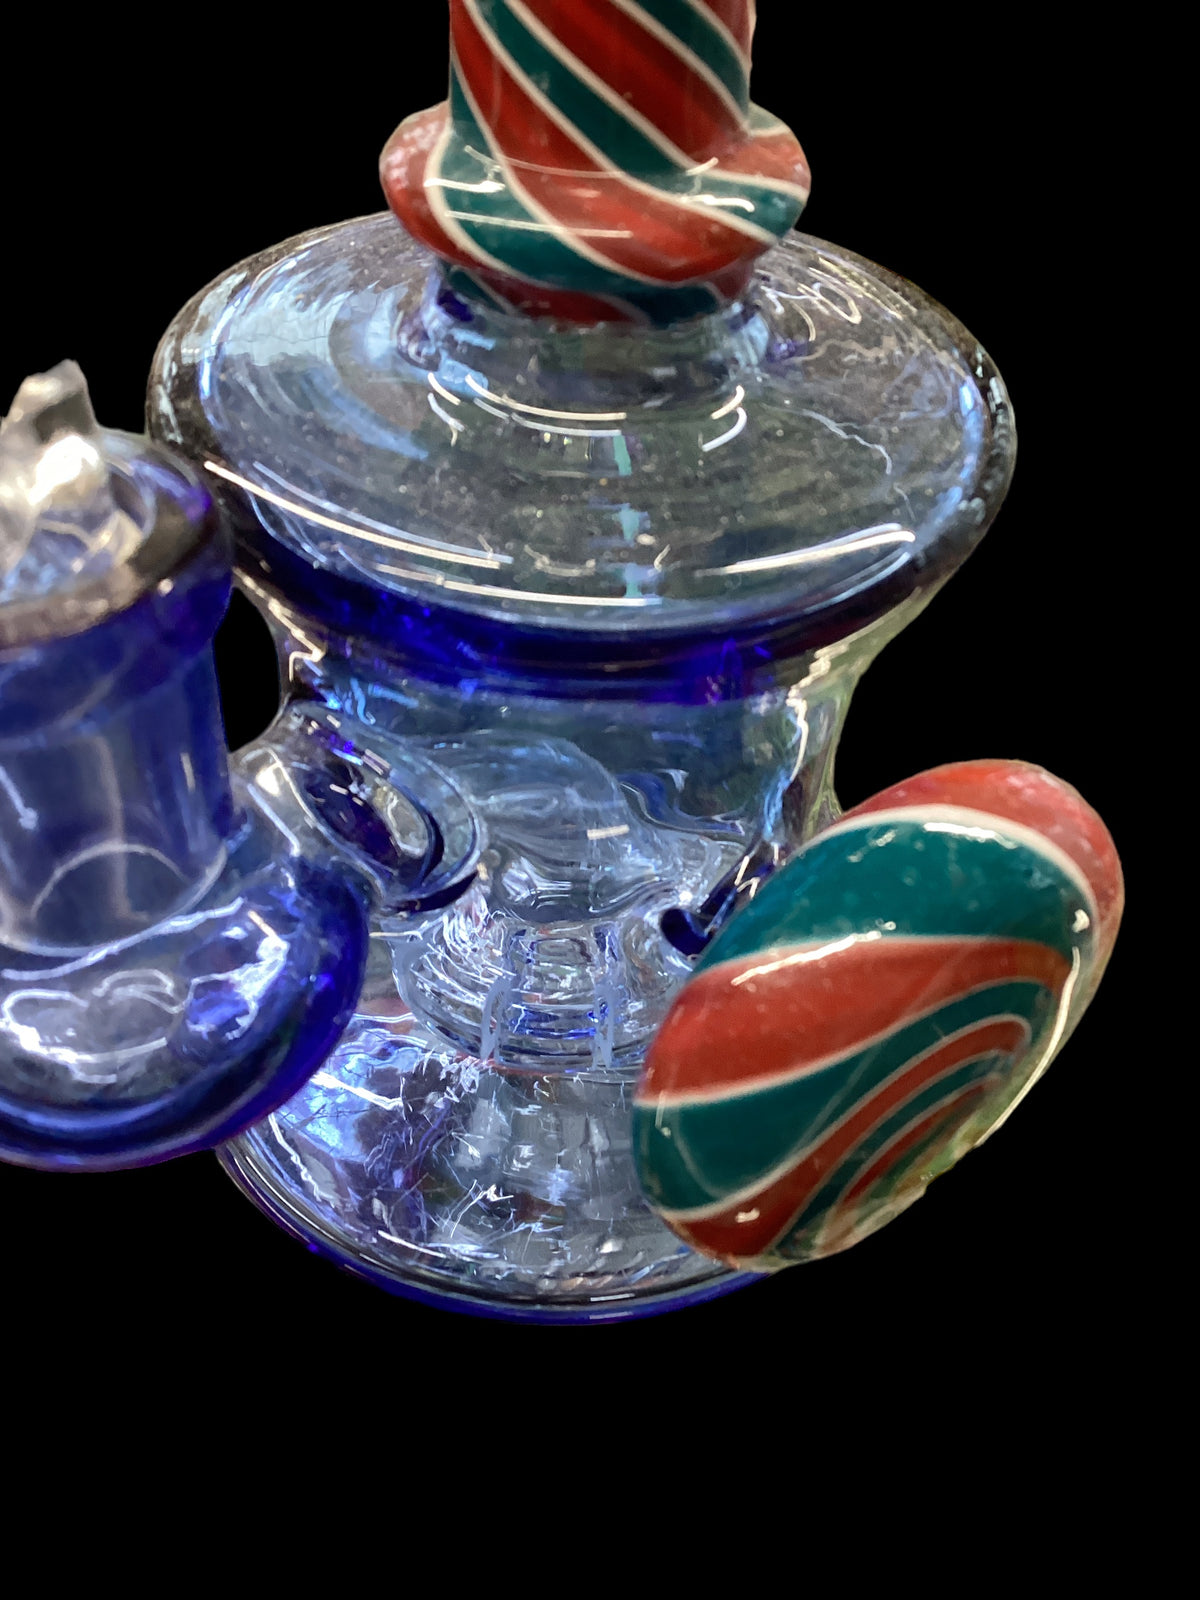 Red and Blue Swirl Rig - 14mm